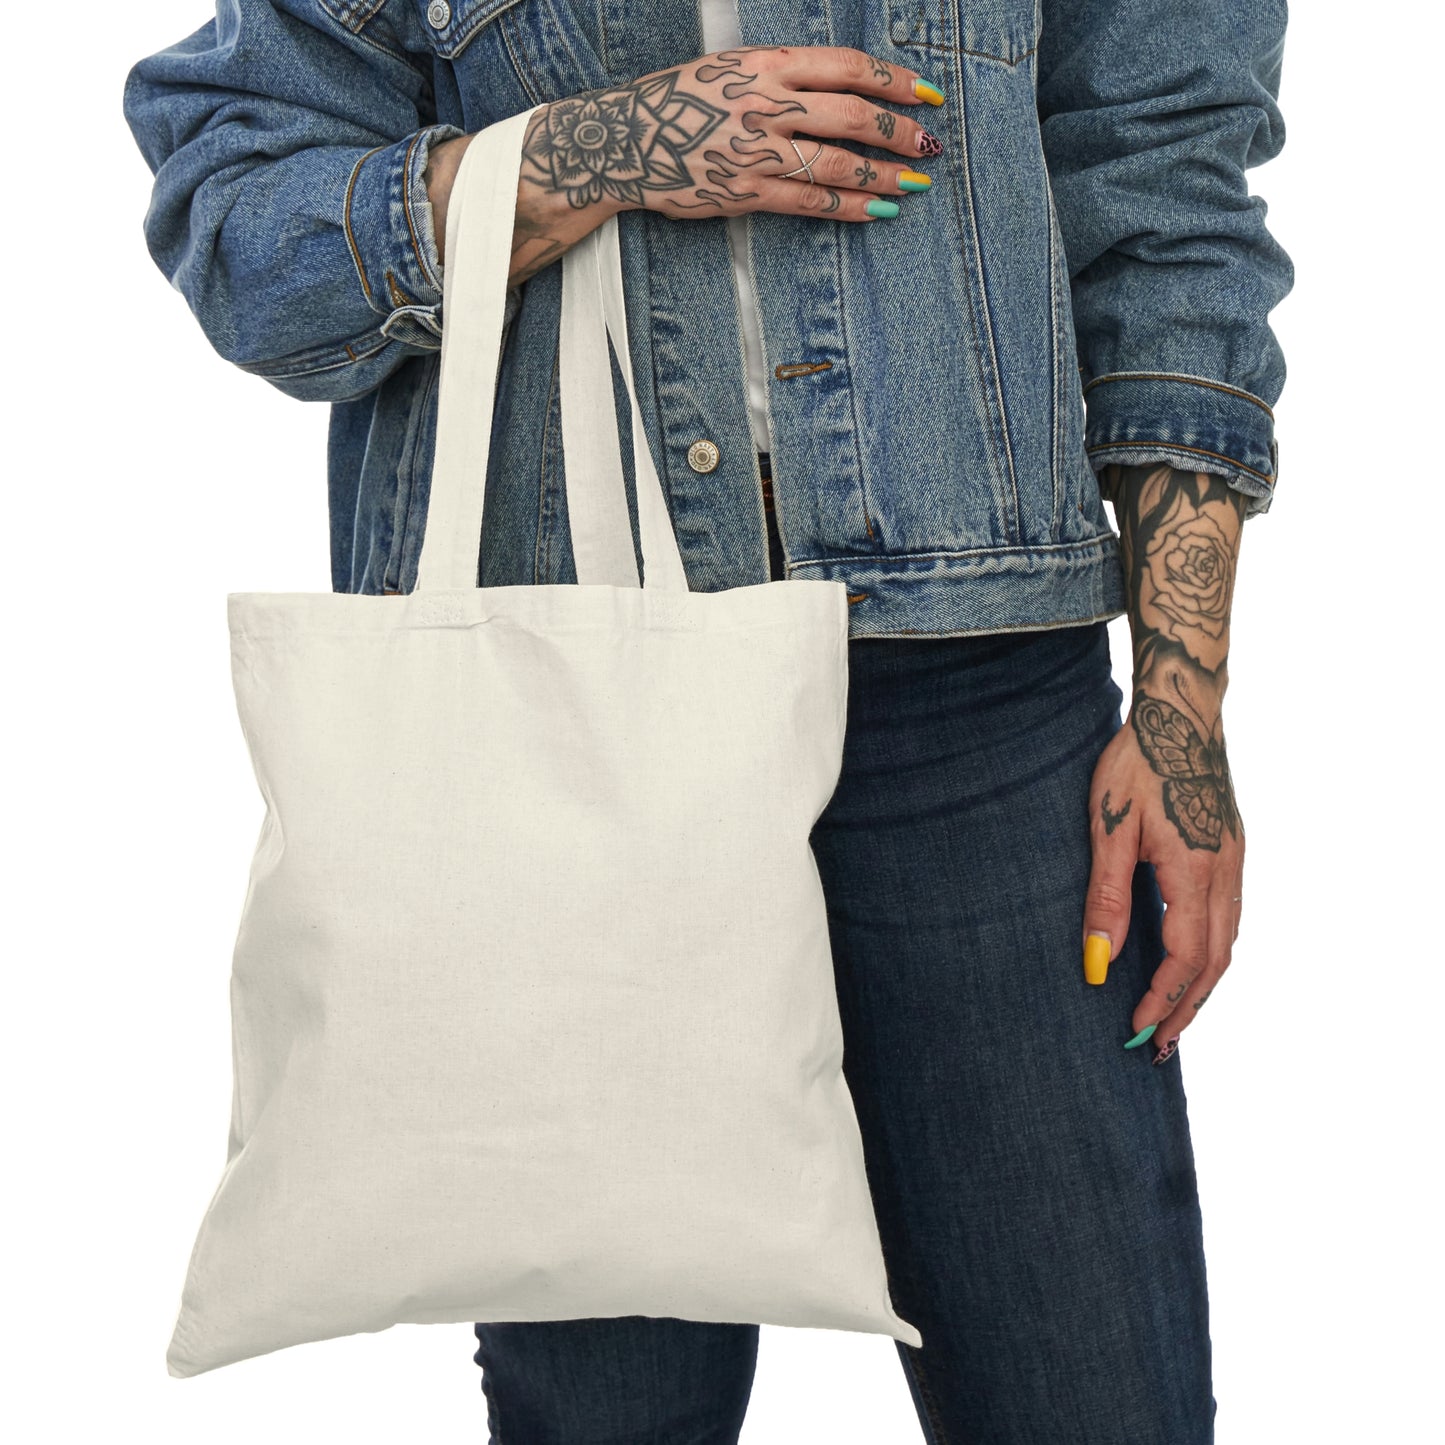 Chasing The Wind - Natural Tote Bag